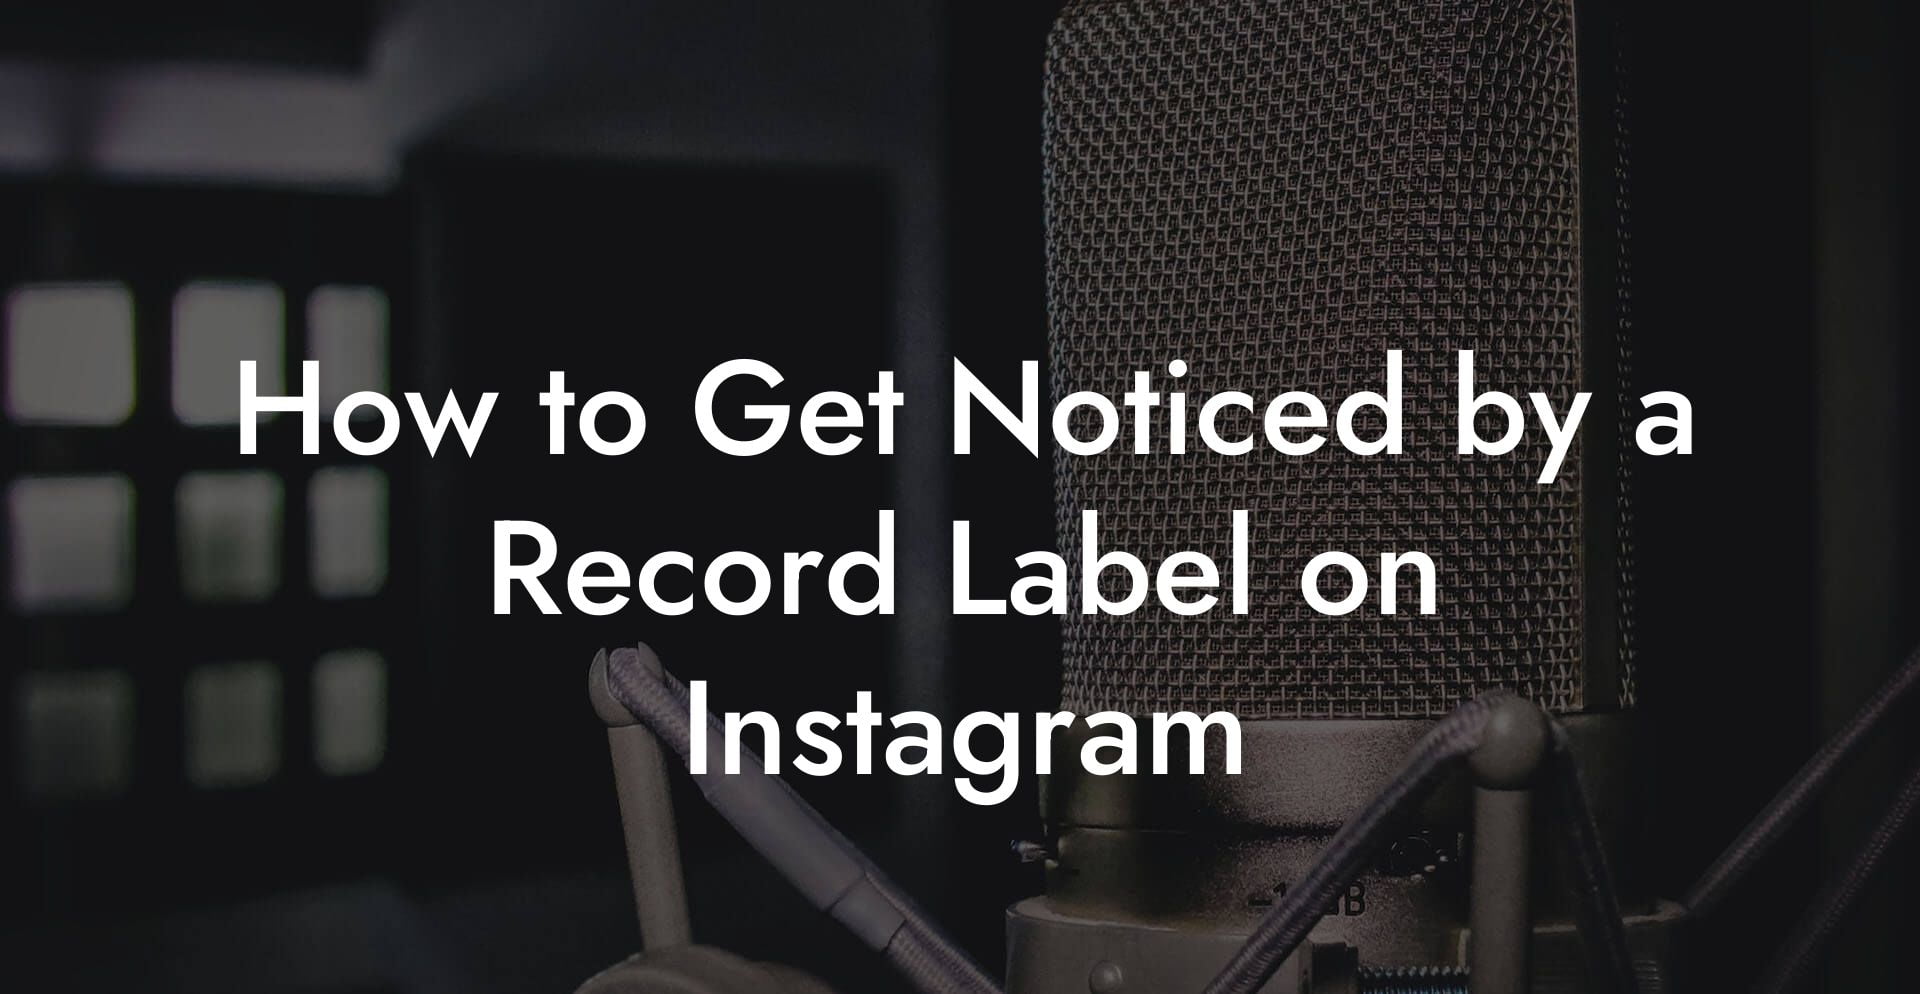 How to Get Noticed by a Record Label on Instagram